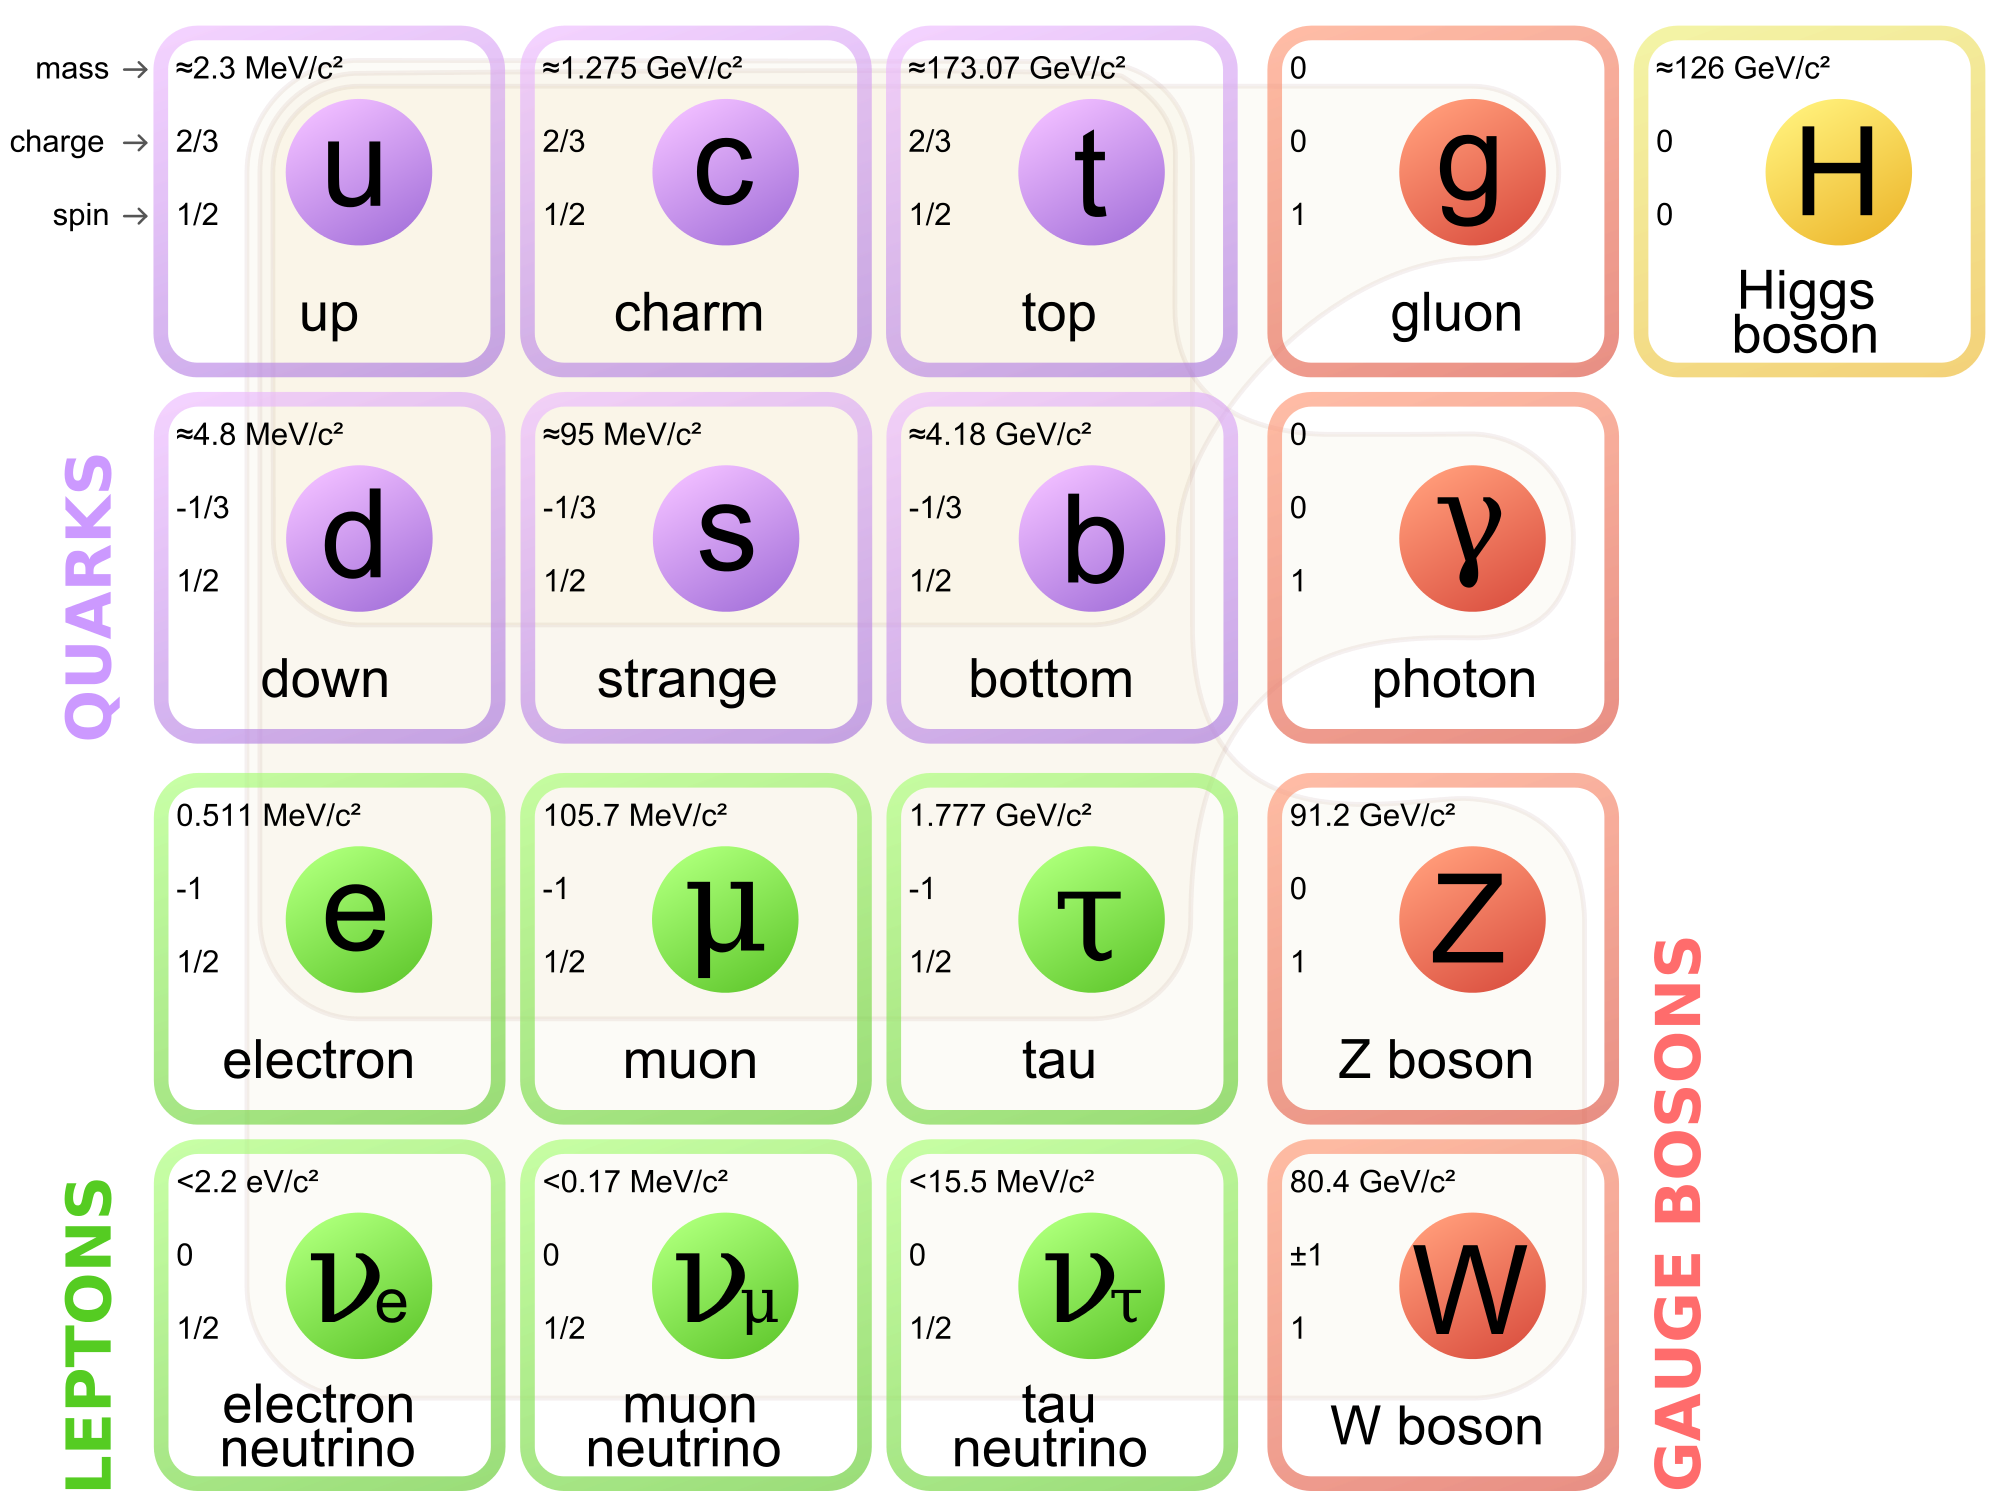 https://upload.wikimedia.org/wikipedia/commons/thumb/0/00/Standard_Model_of_Elementary_Particlessvg/2000px-Standard_Model_of_Elementary_Particles.svg.png